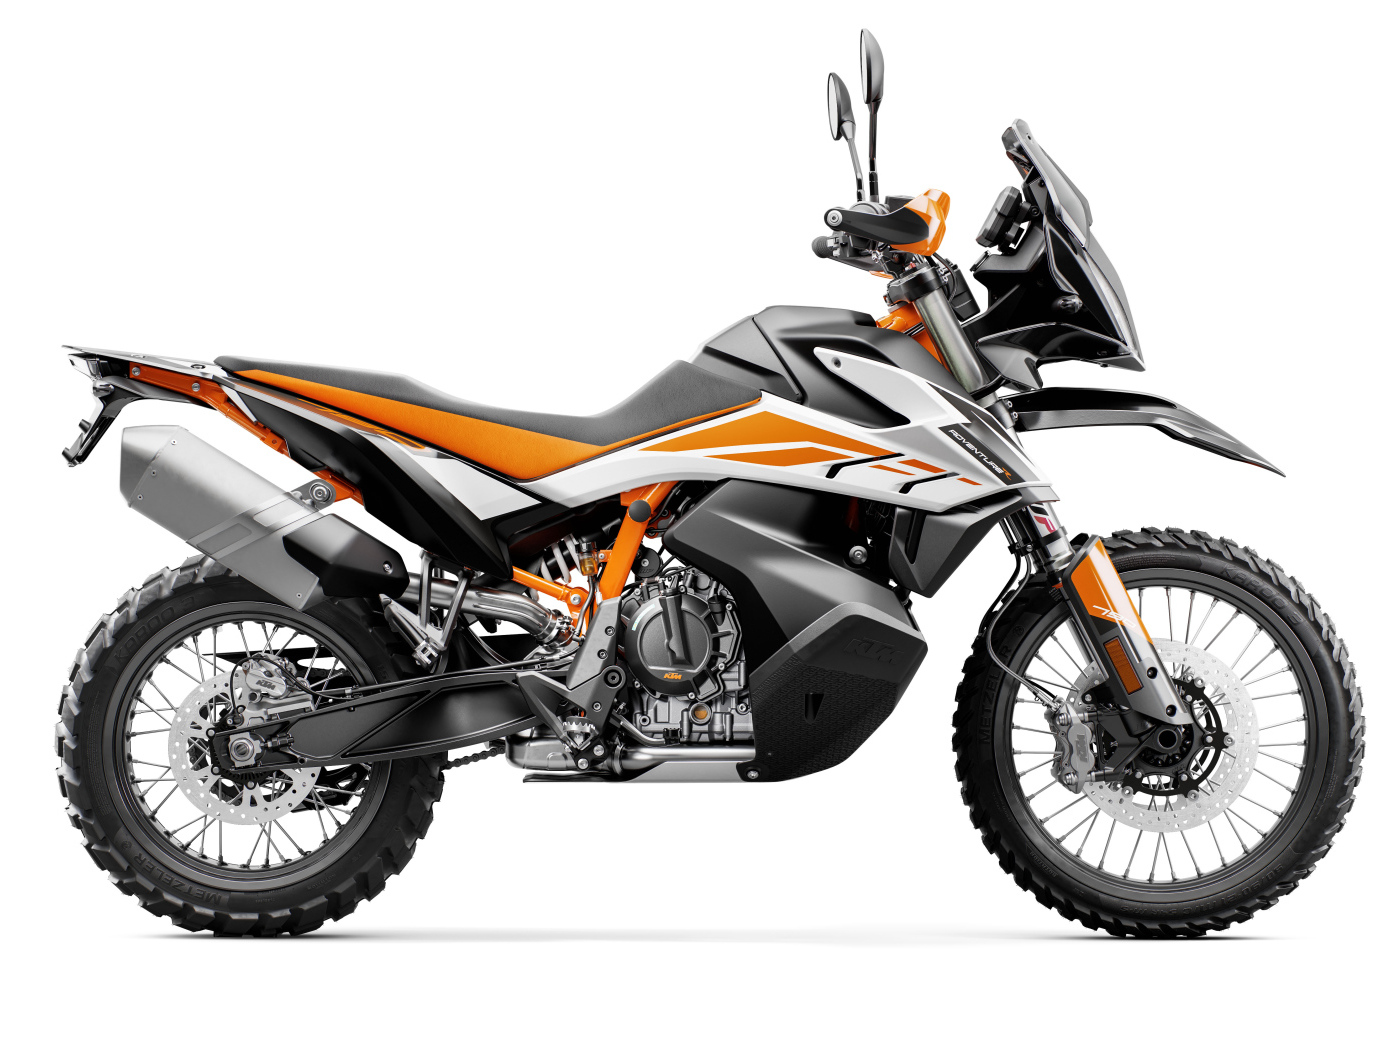 2019 KTM 790 Adventure R motorcycle on a white background